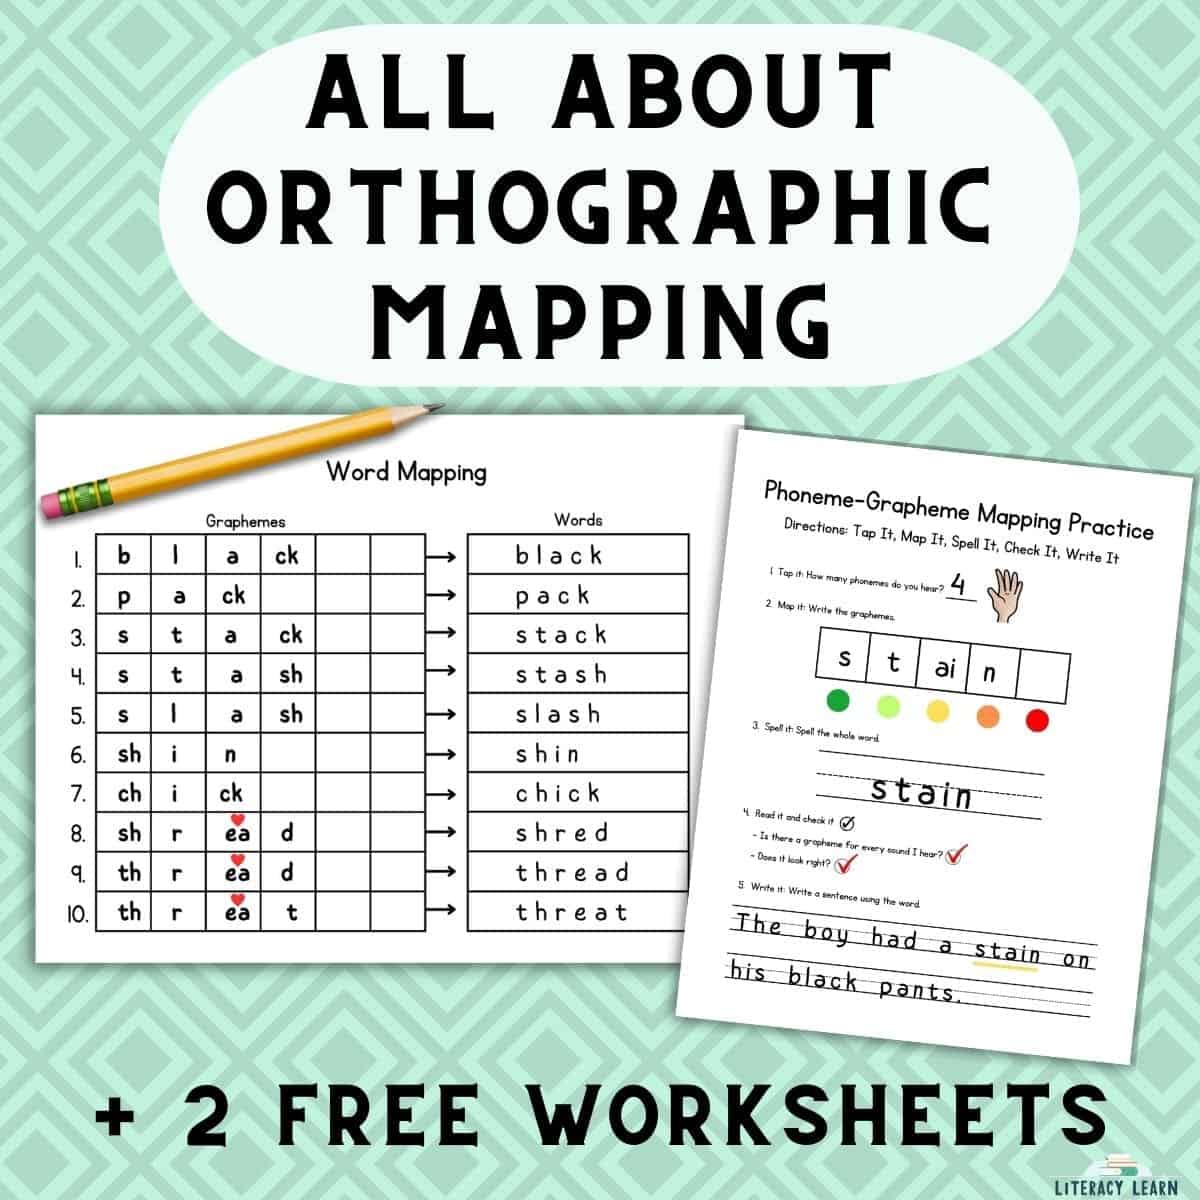 Graphic with title "All About Orthographic Mapping" with two free worksheets and a pencil.